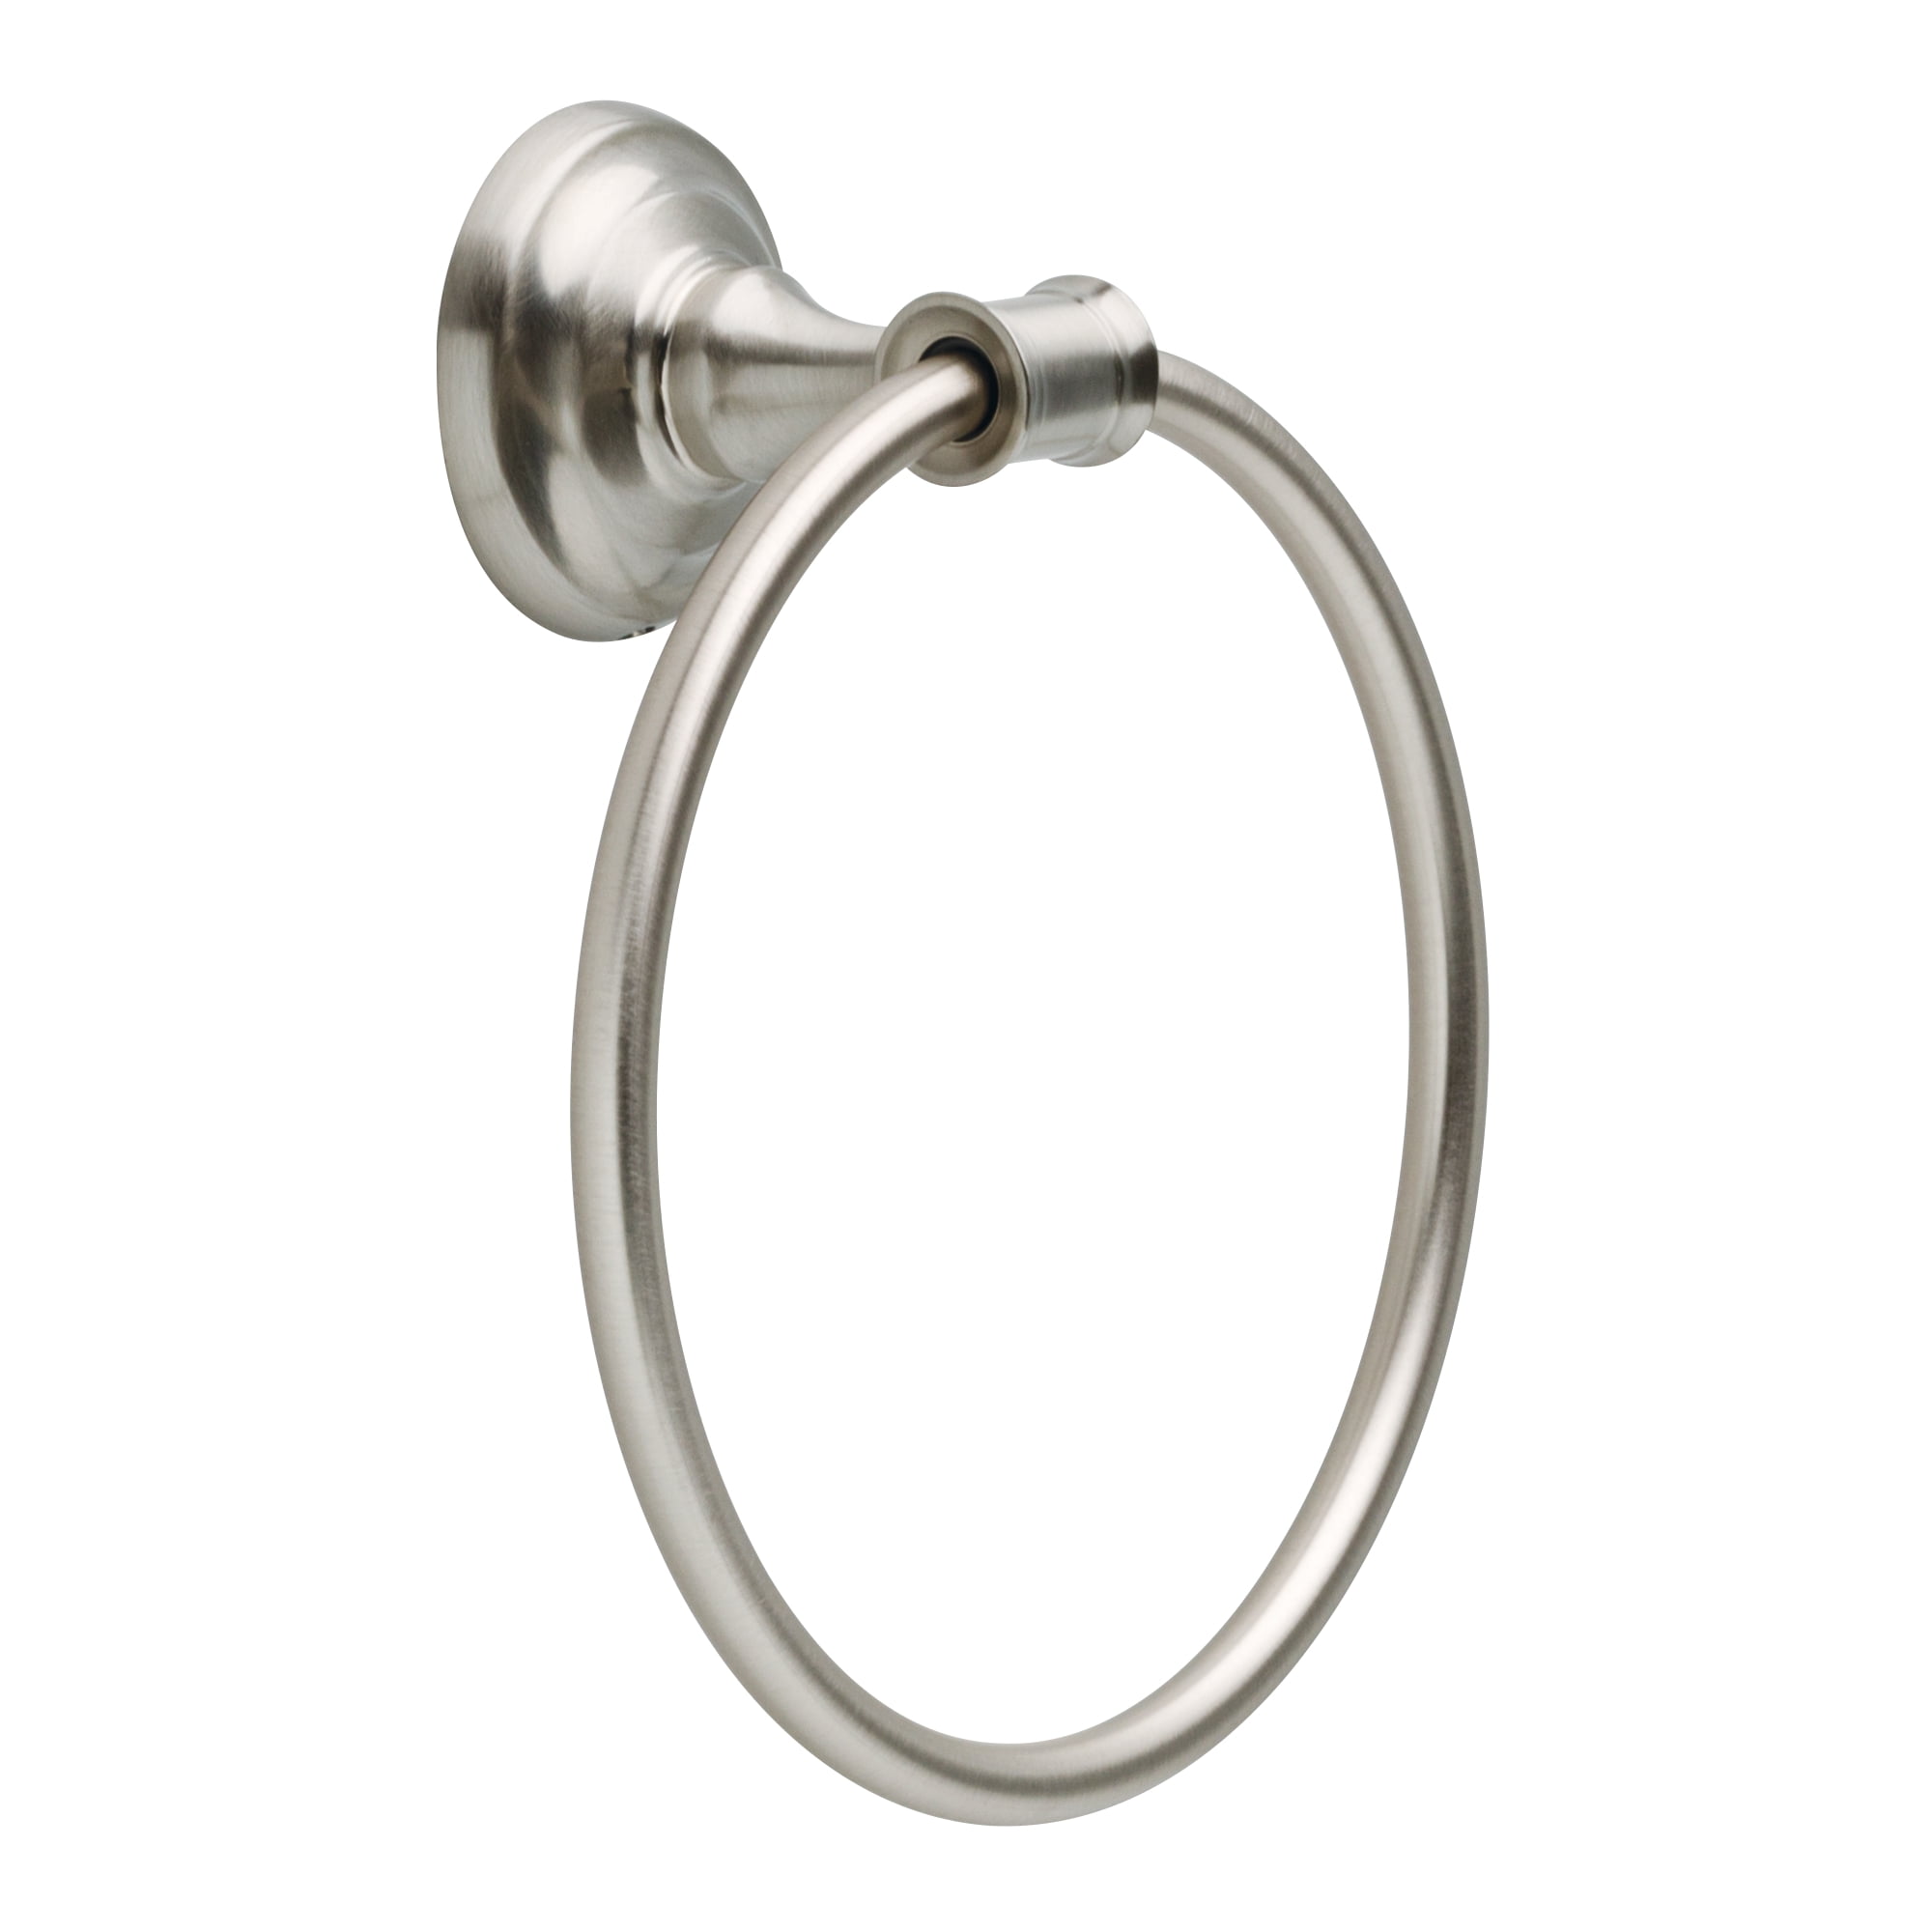 BH&G Wall Mount Towel Ring Holder Sink Bath Hardware Accessory Polished Chrome 